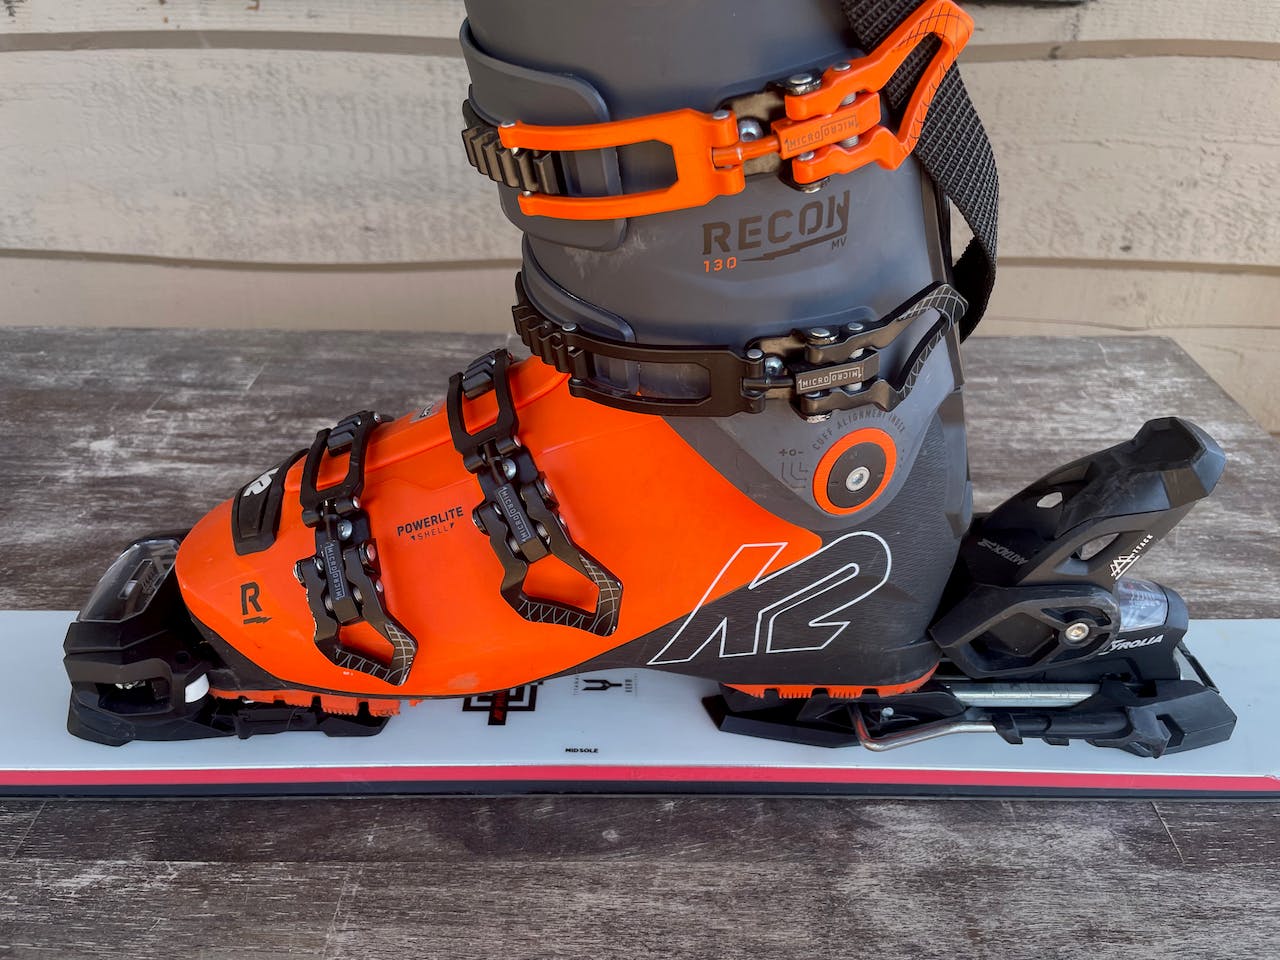 The K3 Recon boots clicked in to the Tyrolia Attack Bindings on a ski.